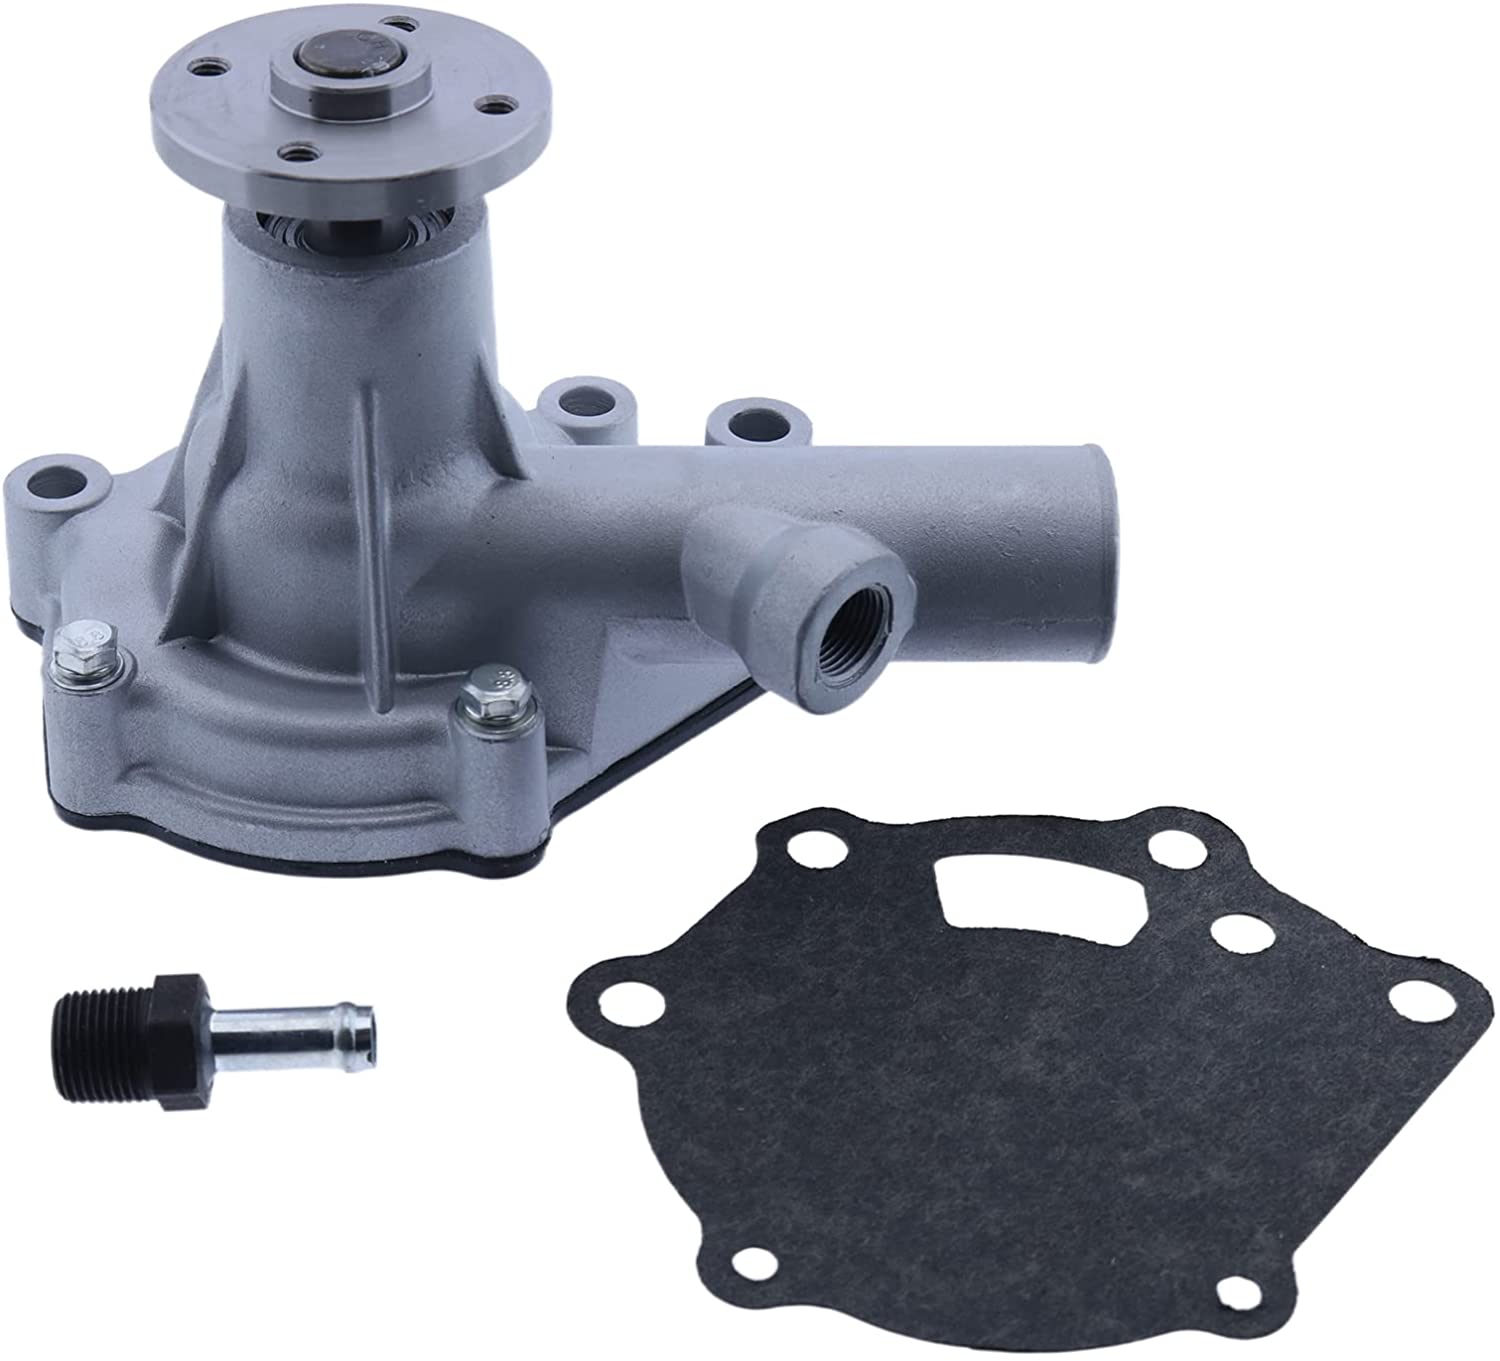 Water Pump for Montana 2840 3040 3130DT 3140DT 3840 LG3840 R2844 S4L S4L2 Engine - KUDUPARTS